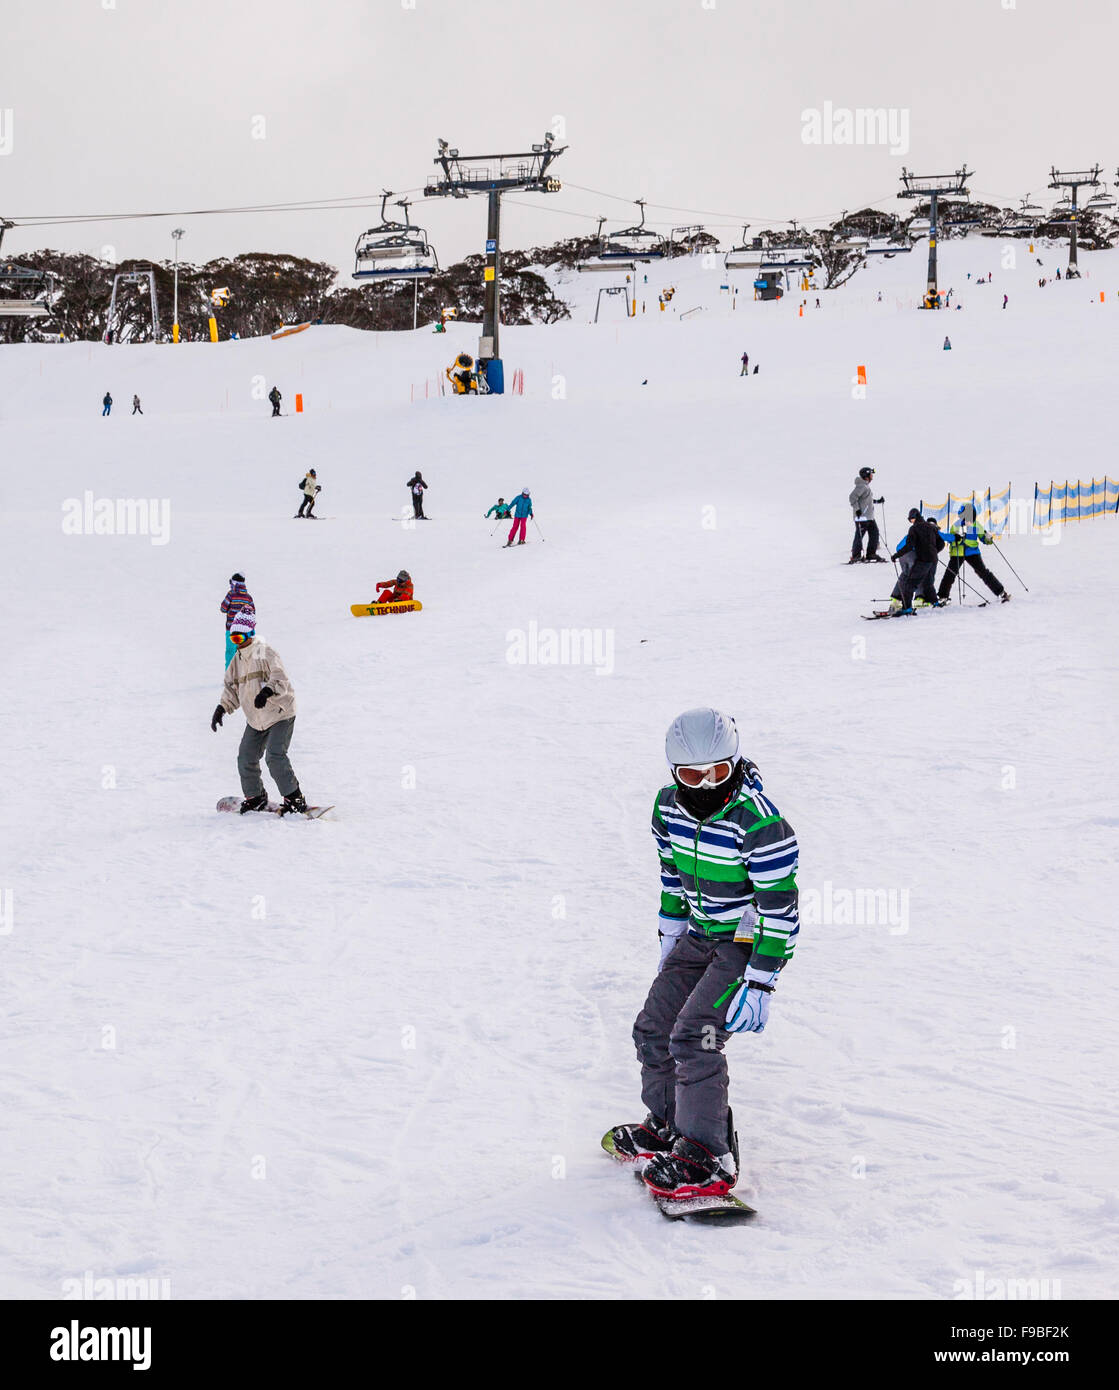 snow boarding on the slope of Back Perisher Mountain, Perisher Valley ski resort, Snowy Mountains, New South Wales, Australia Stock Photo